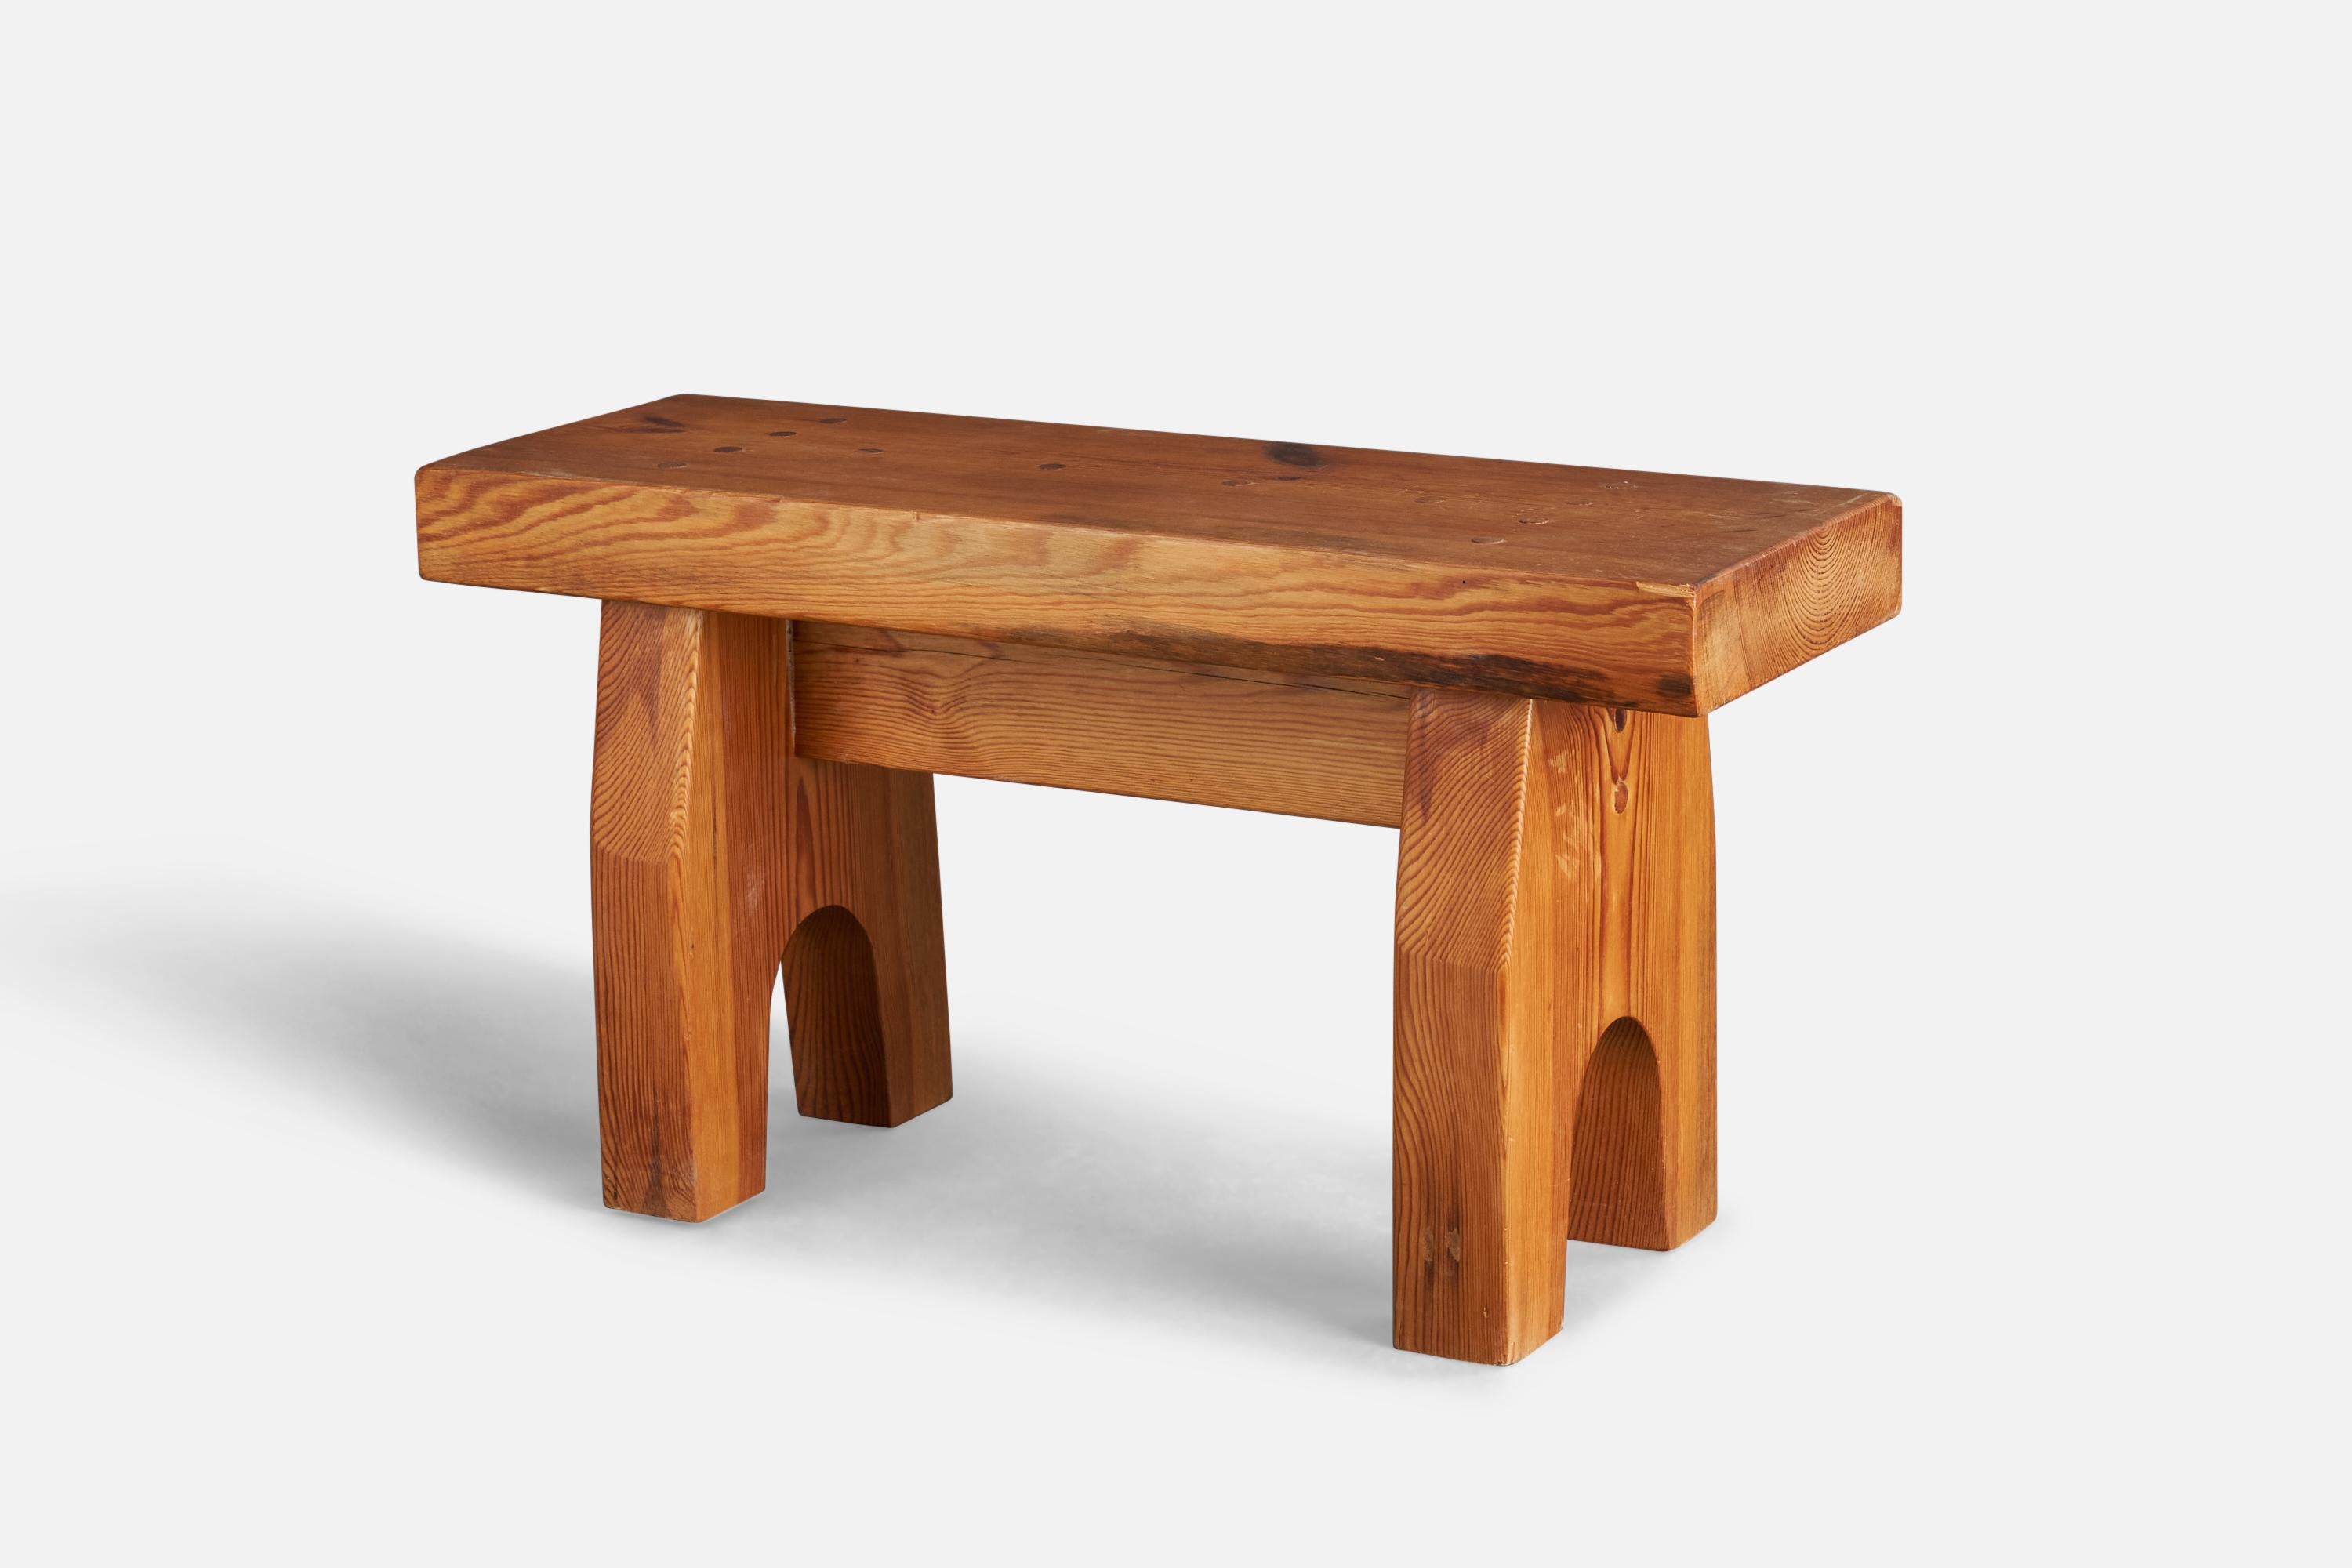 A pine stool/bench designed and produced by a Swedish Designer, Sweden, 1950s.